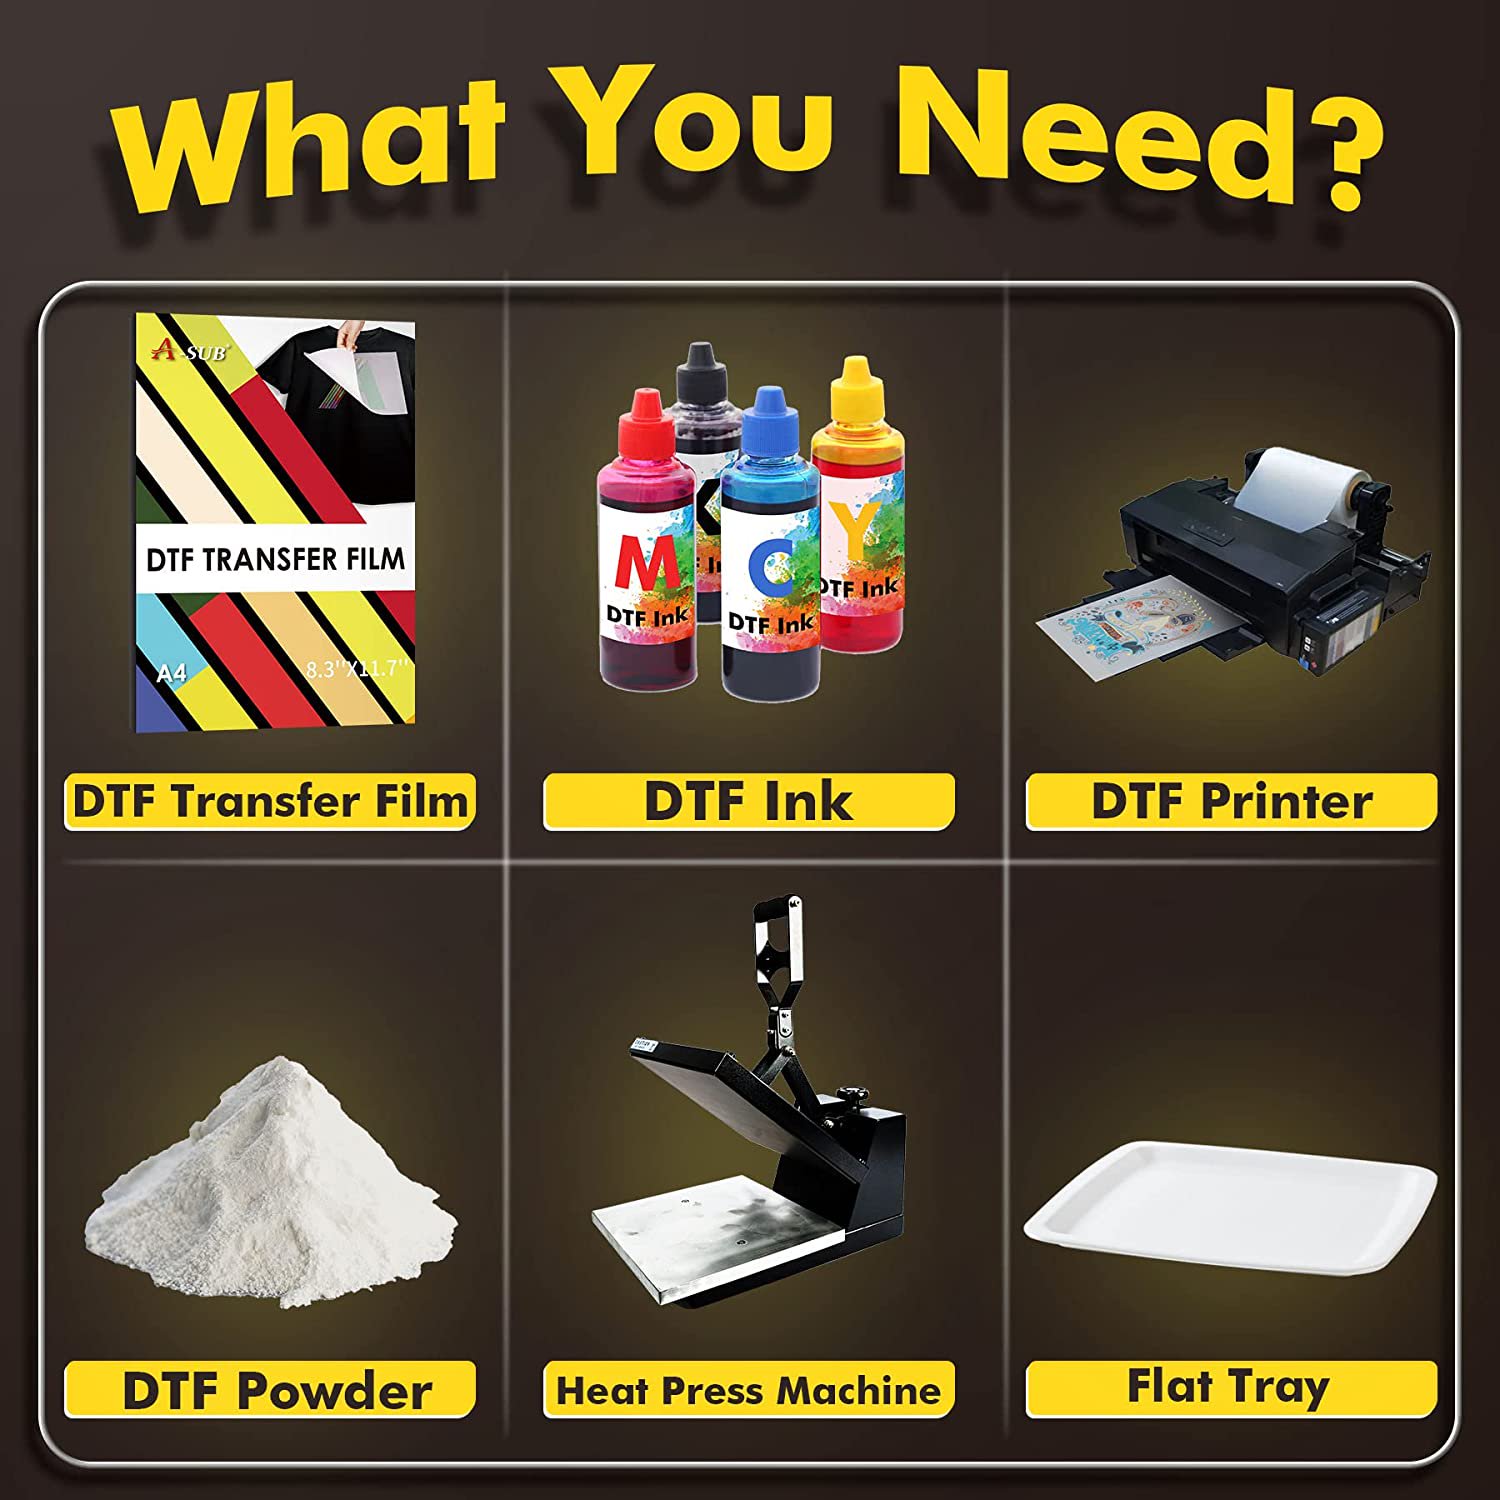 DTF Film and Powder Bundle - A-sub DTF Powder for Sublimation 2.2lb and DTF Film Paper A4 for Dark/Light Fabrics 8.3 inchx11.7 inch for DTF Printing.